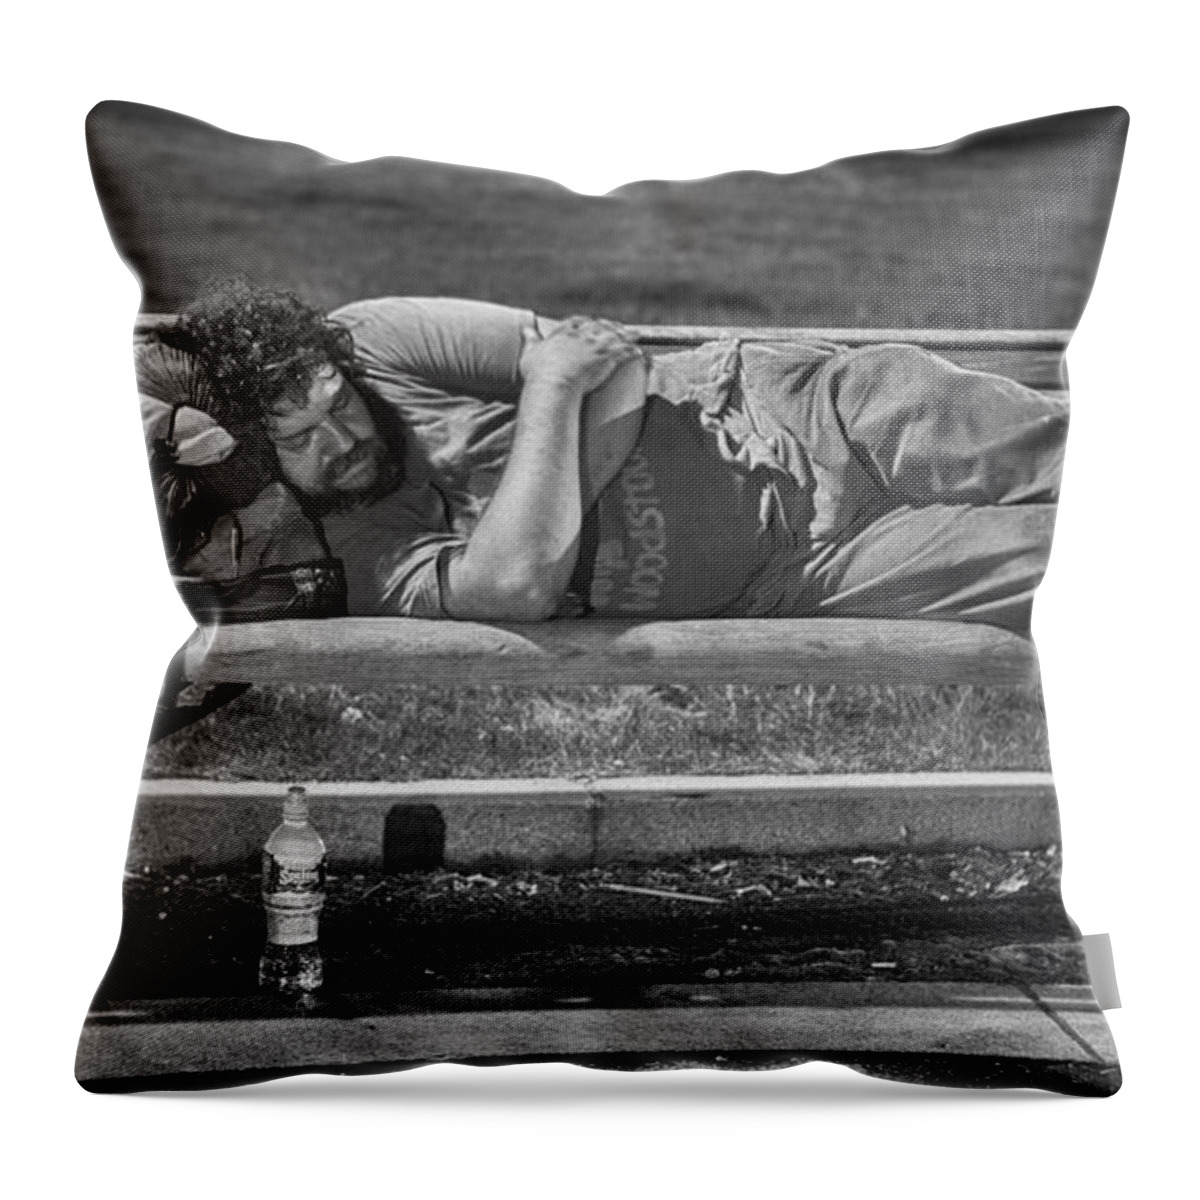 Boston Throw Pillow featuring the photograph Woodstock Sleeps by Kate Hannon